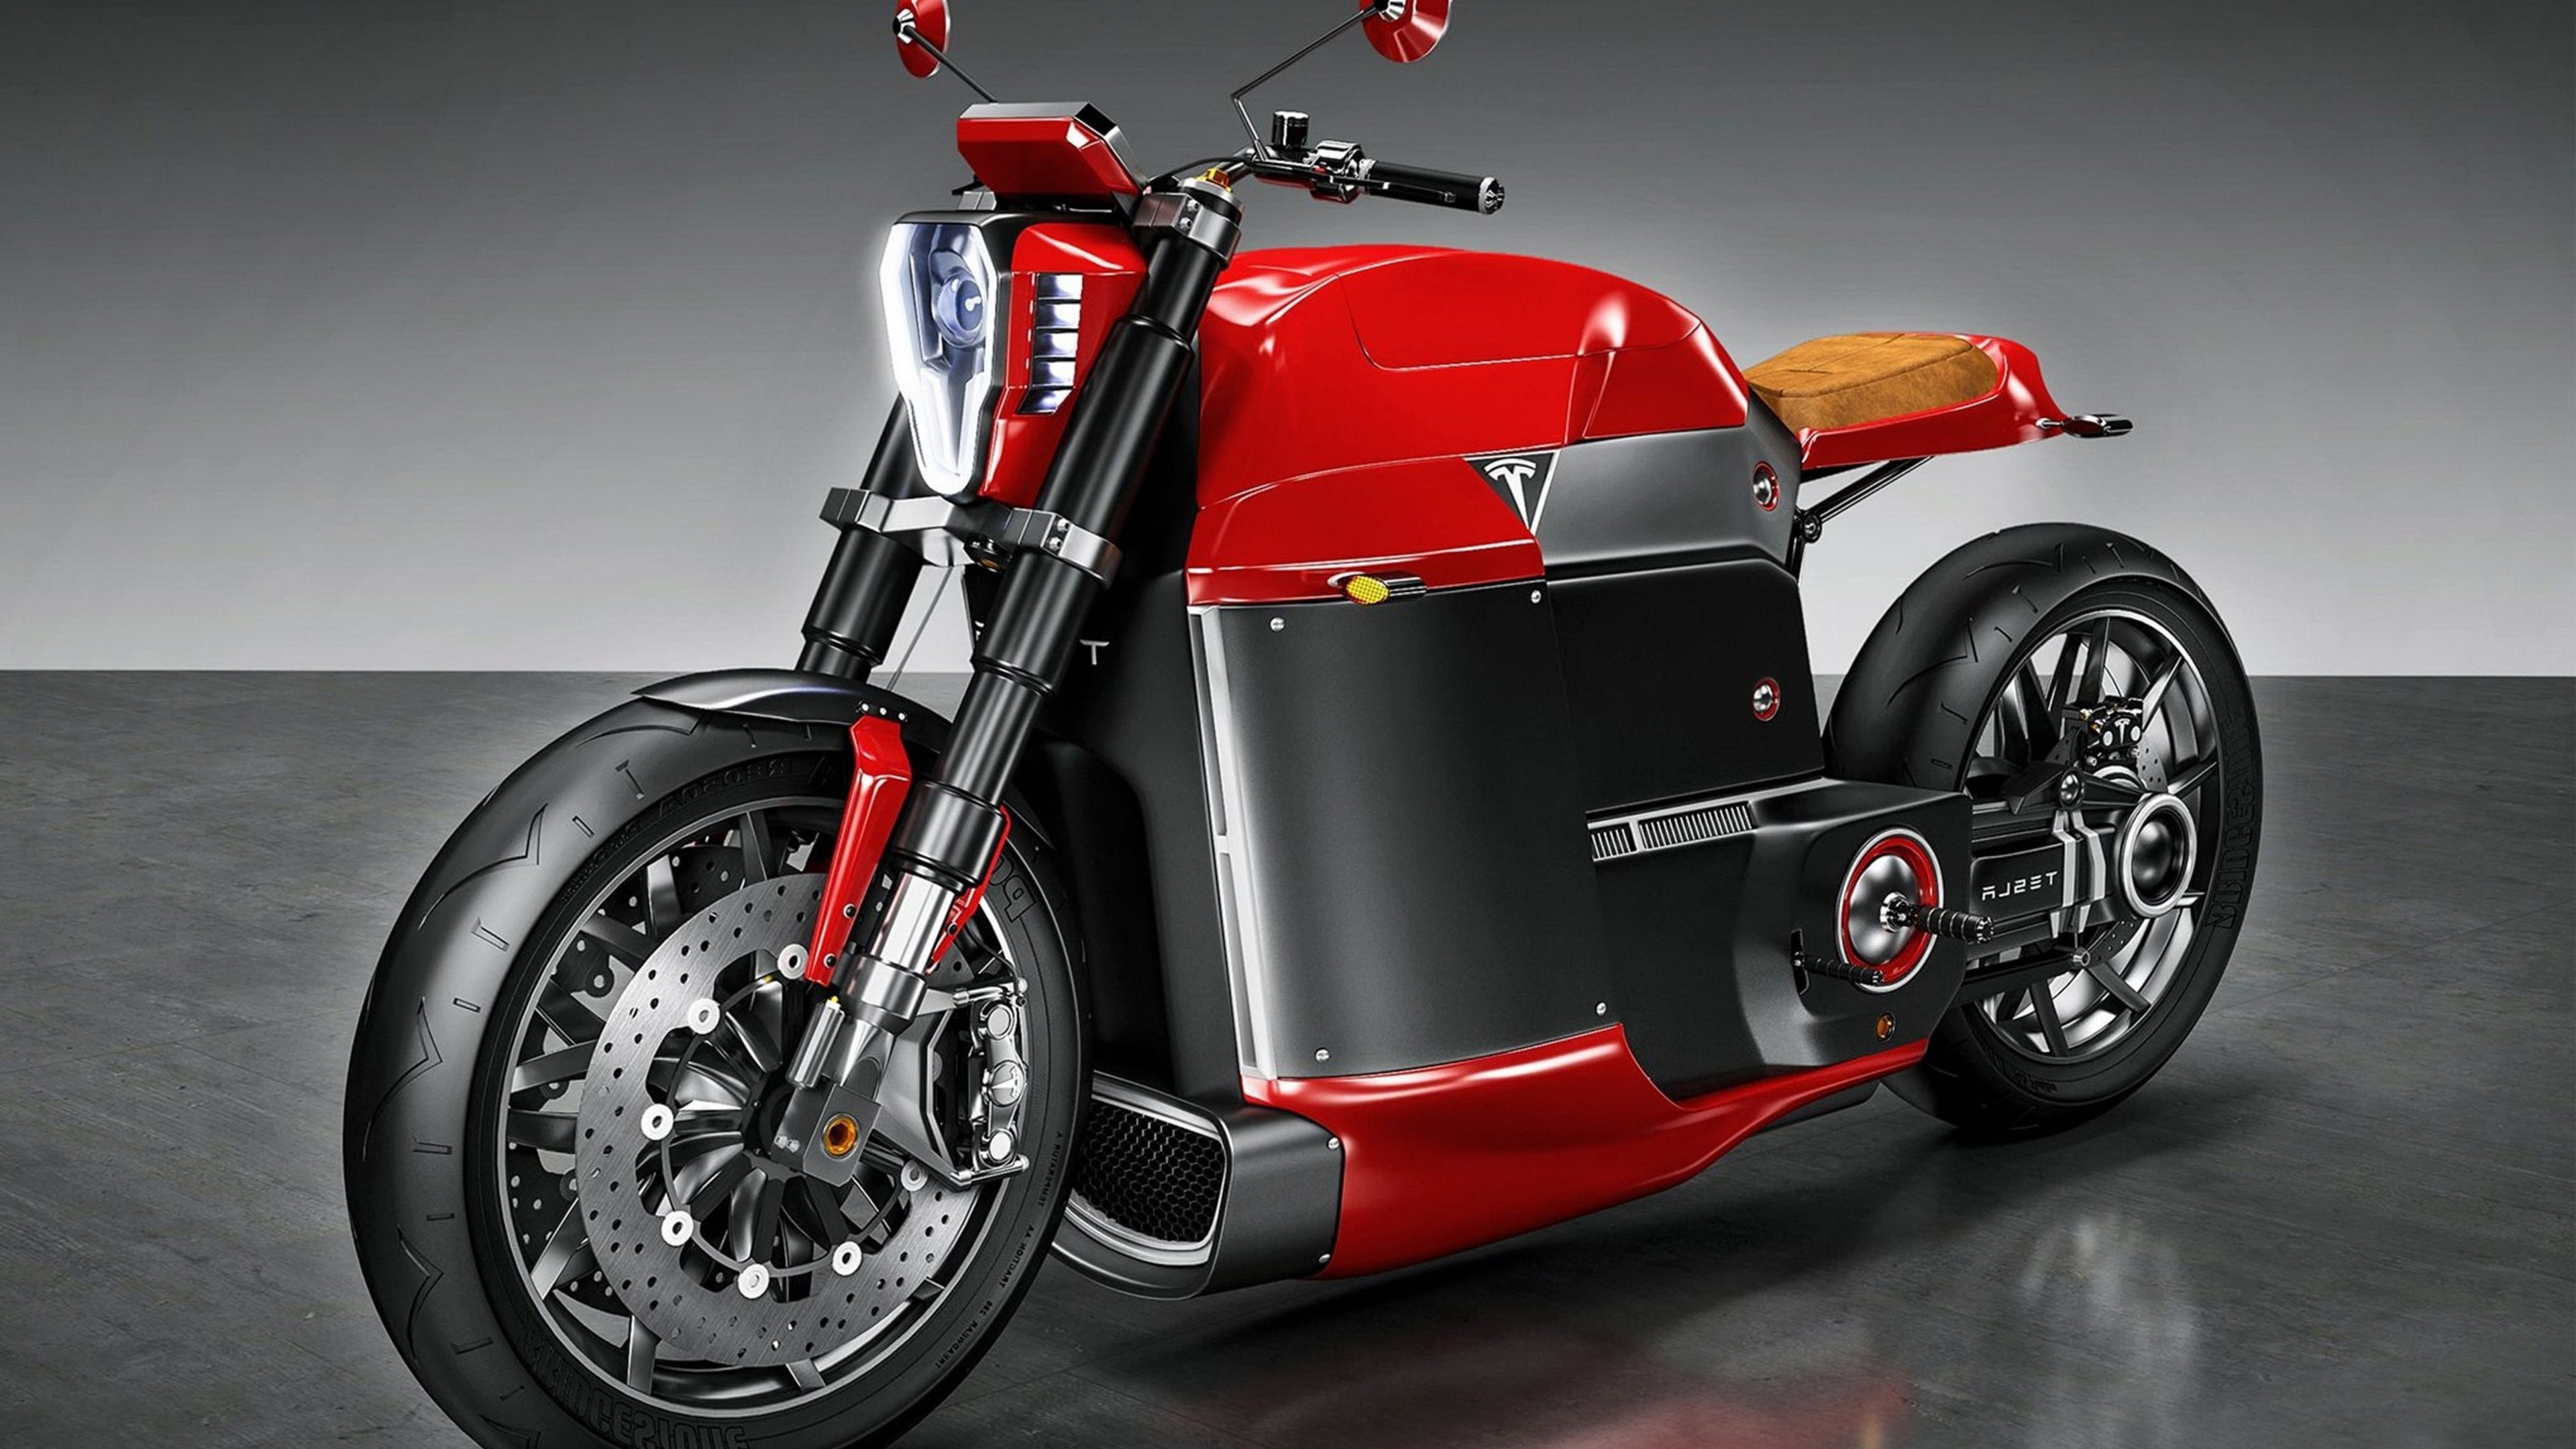 concept, red, beautiful, motorcycle, Tesla, speed, fast, powerful